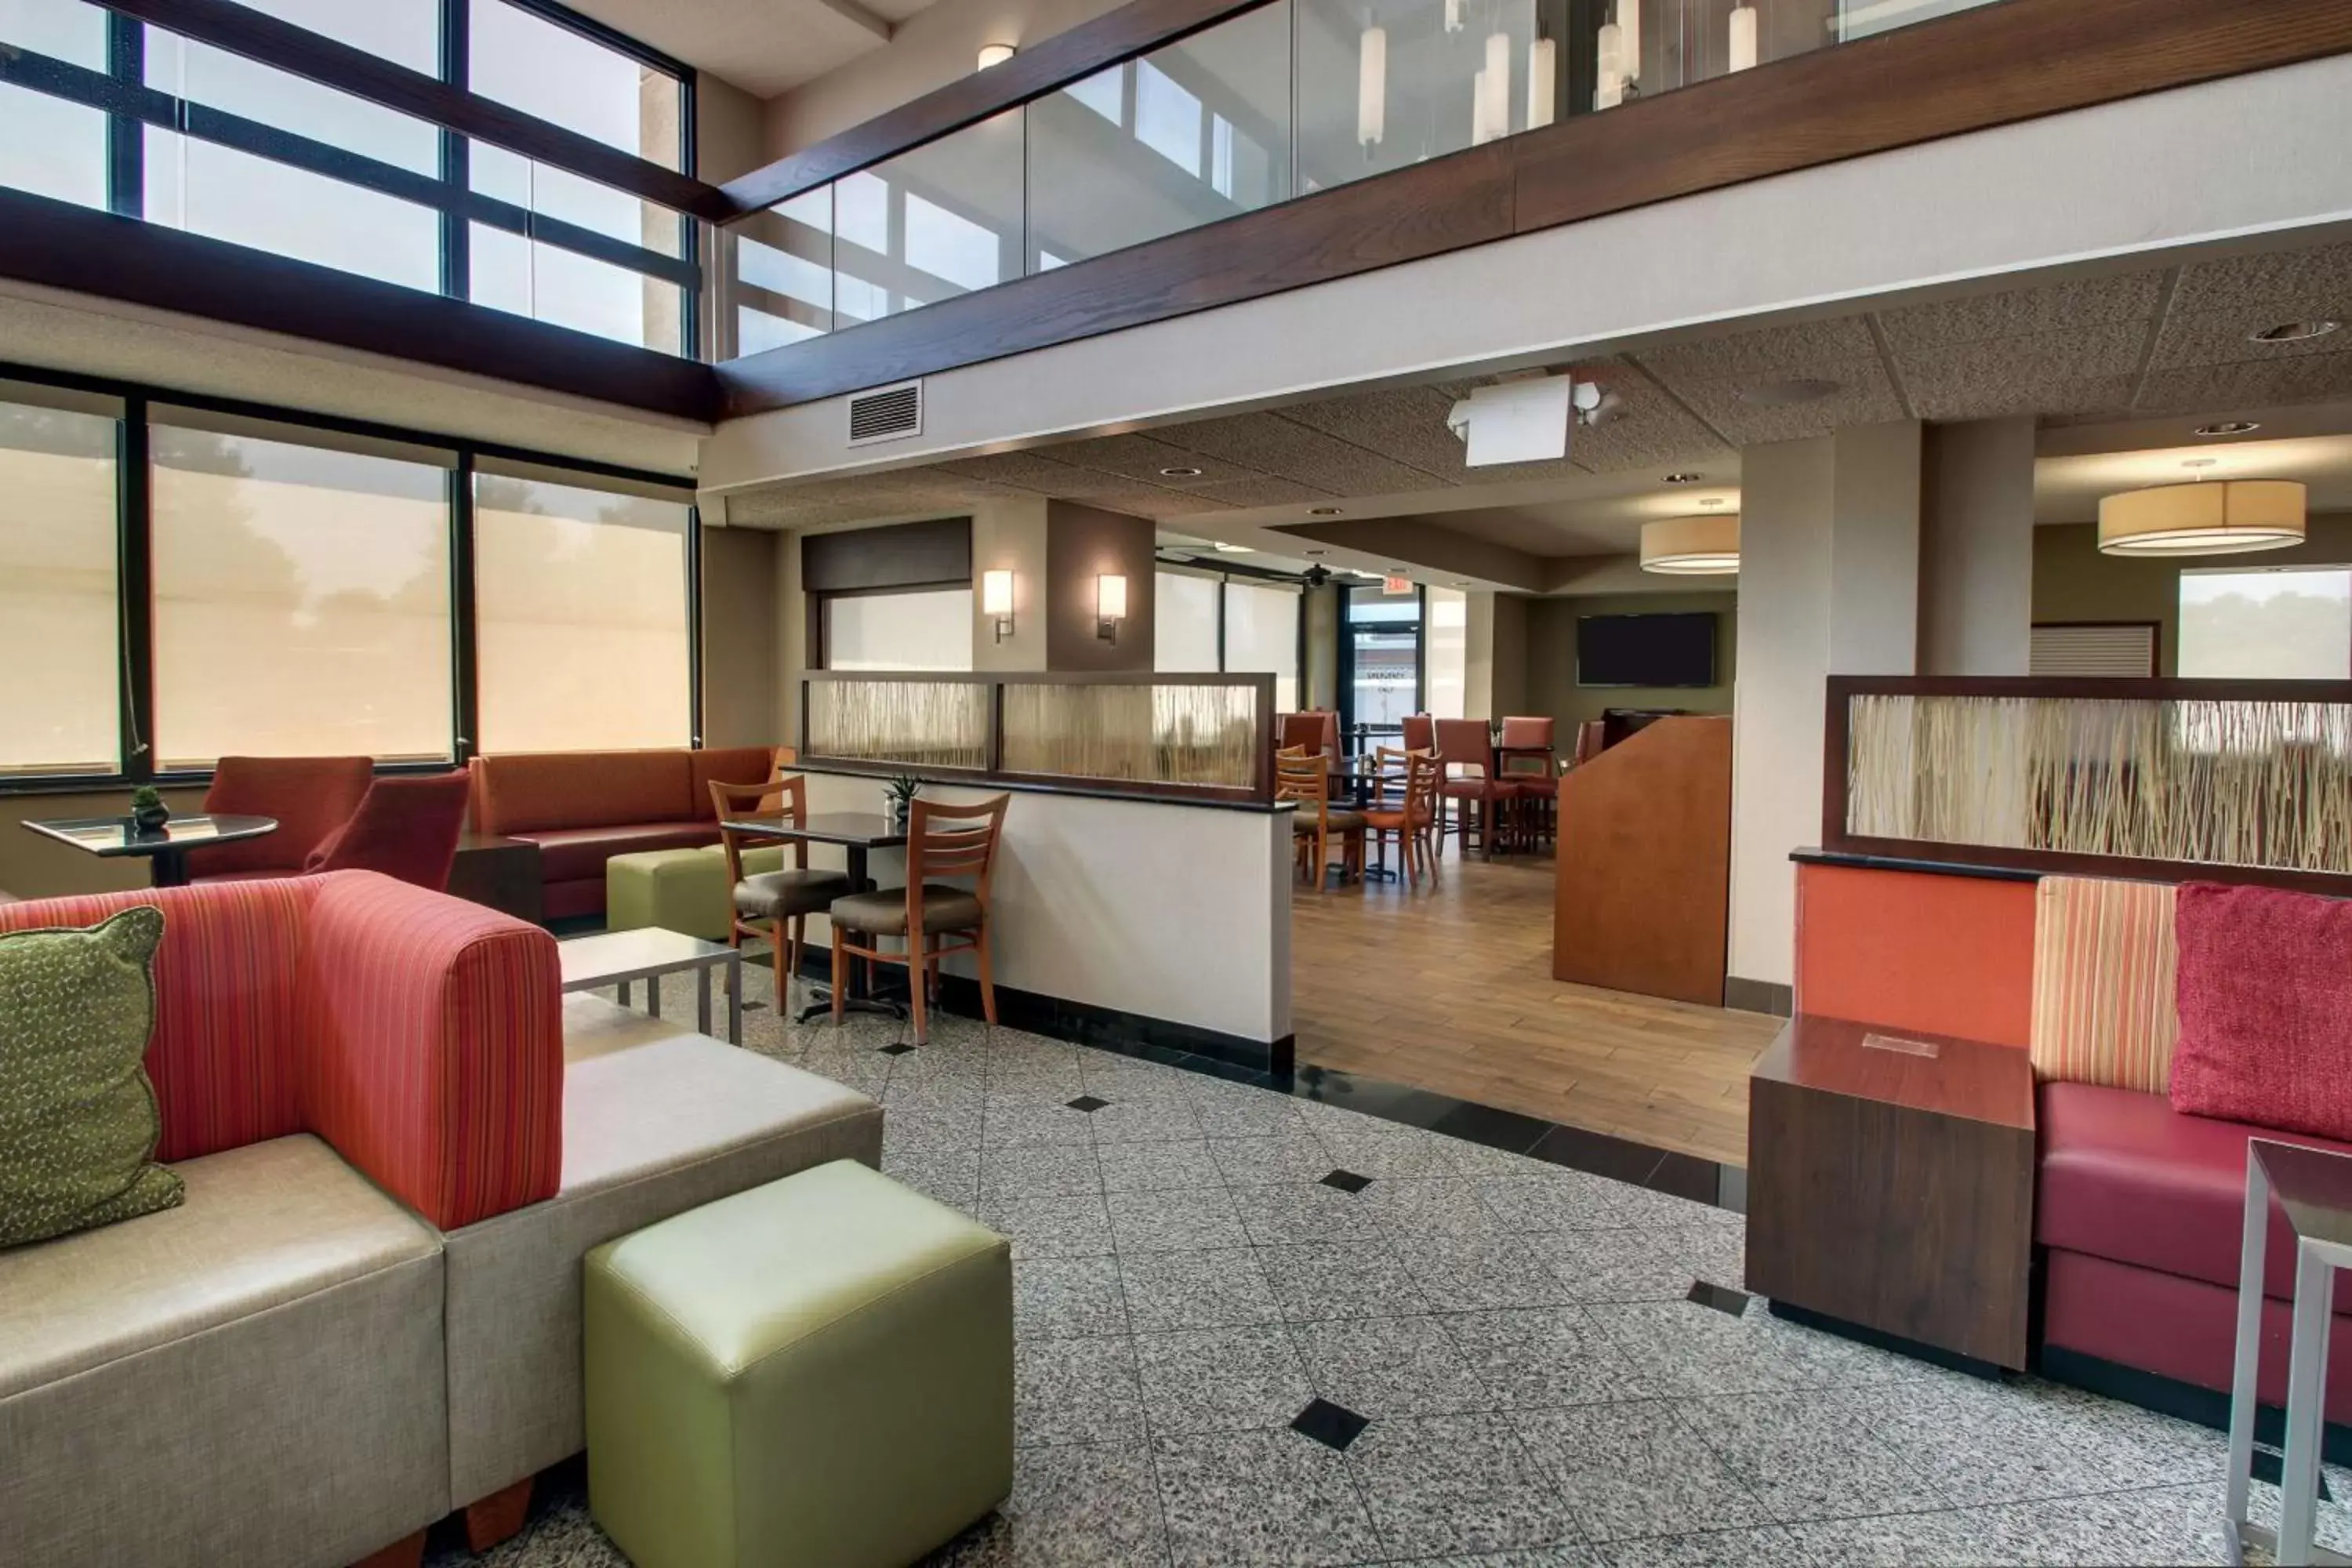 Restaurant/places to eat, Lobby/Reception in Drury Inn & Suites Evansville East